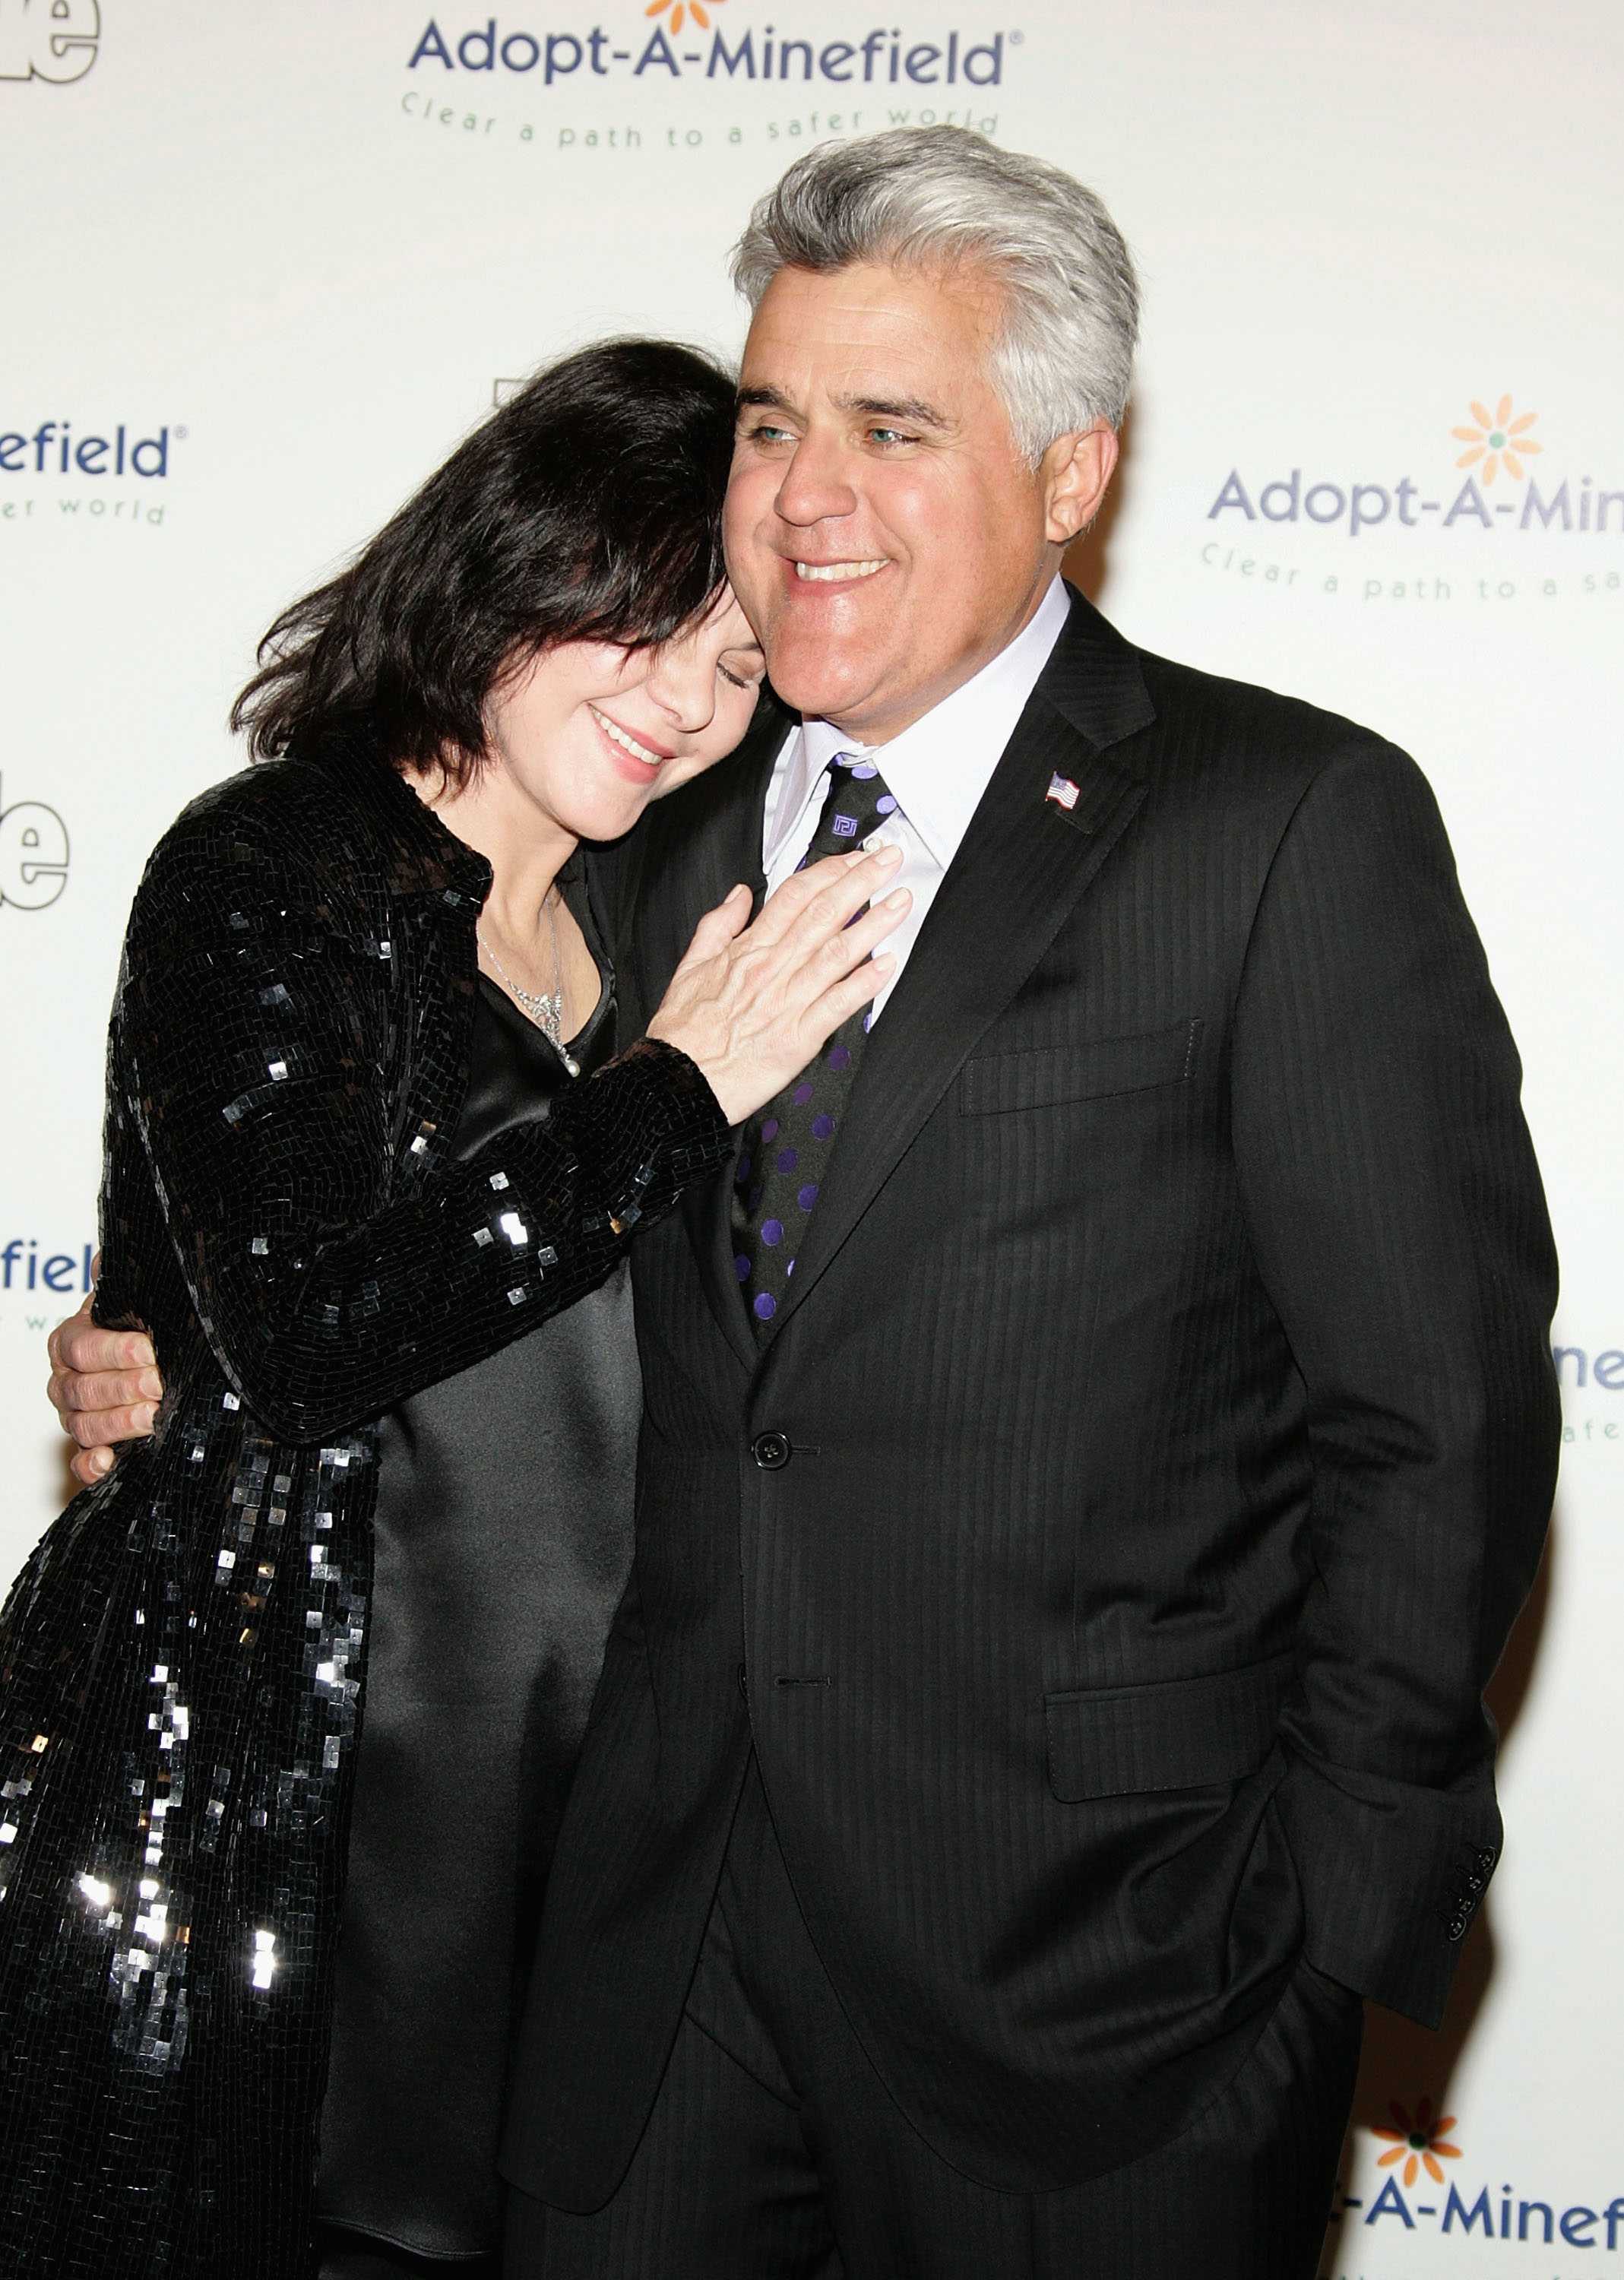 Jay Leno and Mavis Leno attend the Fifth Annual Adopt-A-Minefield Gala night held at the Beverly Hilton Hotel on November 15, 2005, in Beverly Hills, California. | Source: Getty Images